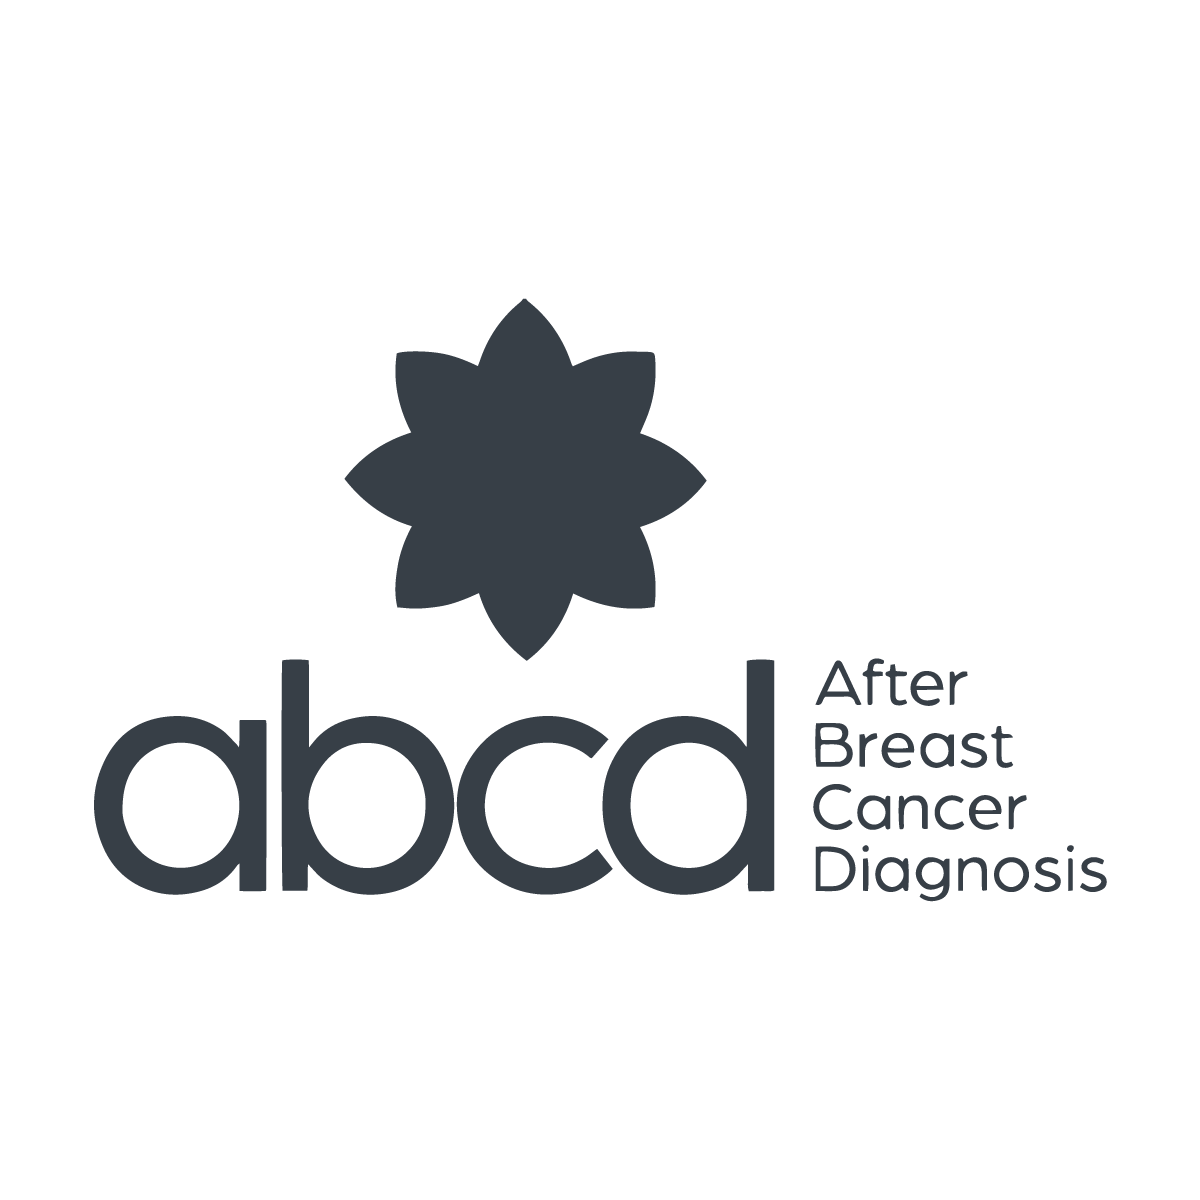 After Breast Cancer Diagnosis logo